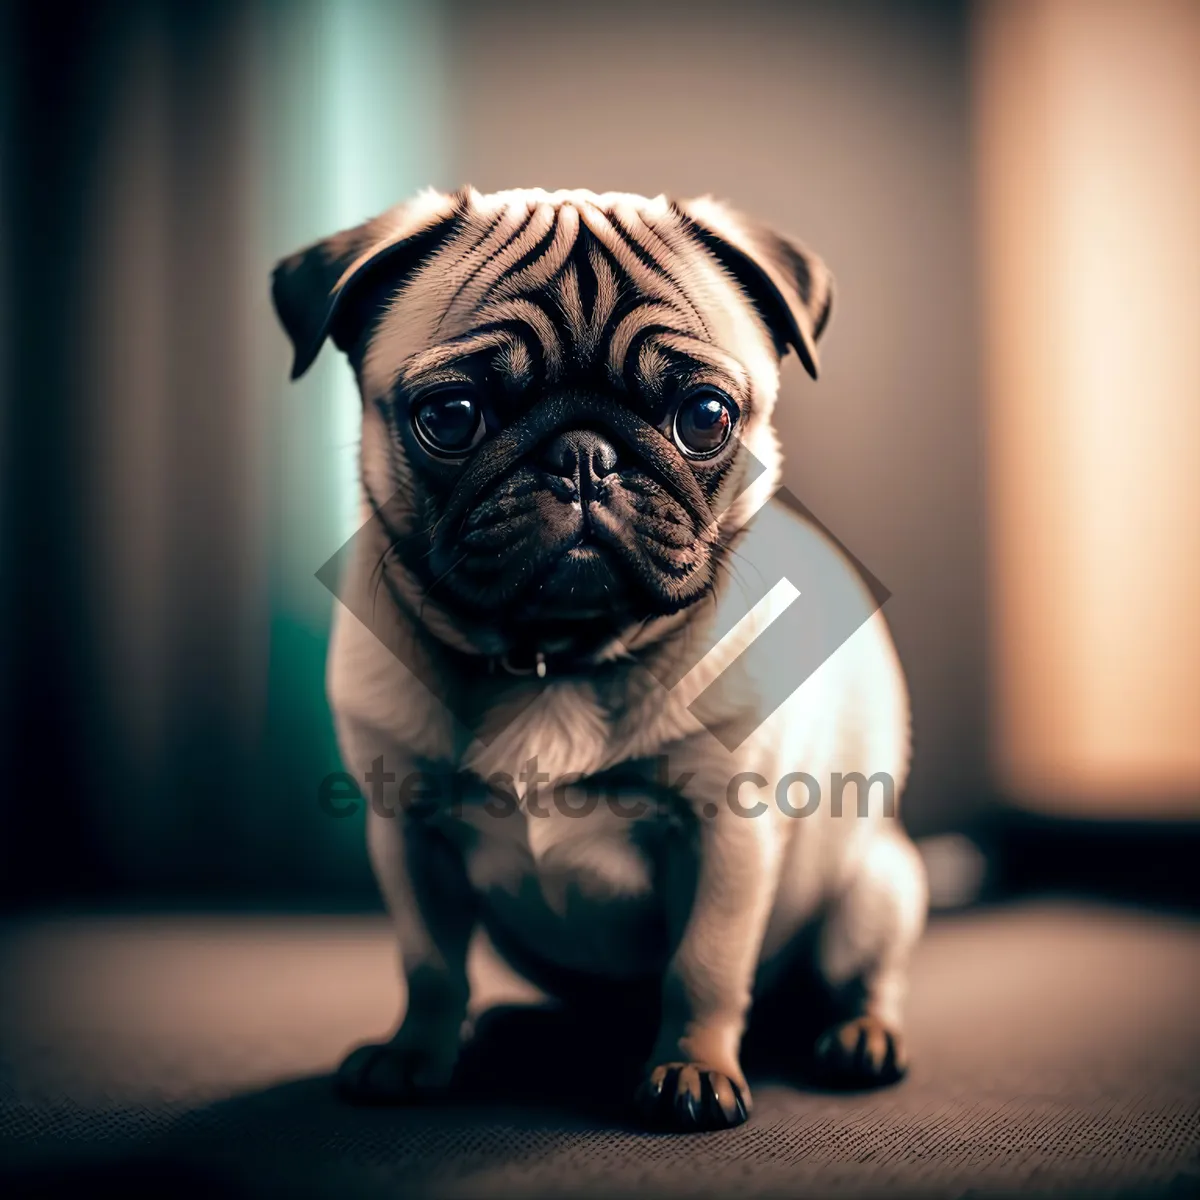 Picture of Cute Wrinkled Pug Puppy - Adorable Purebred Canine Portrait